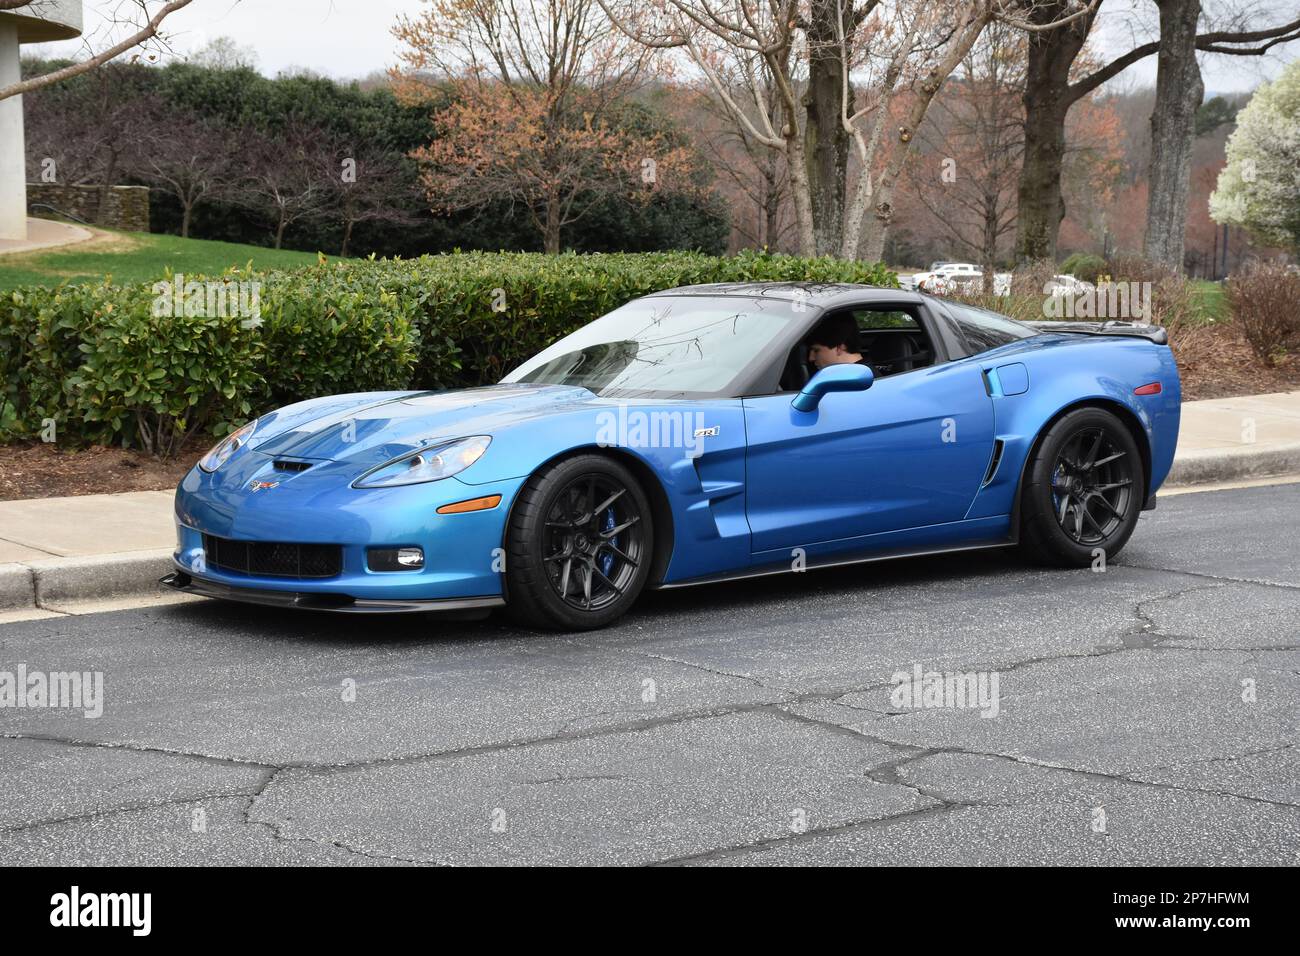 A ZR1 Supercharged C6 Corvette on display at a car show. Stock Photo